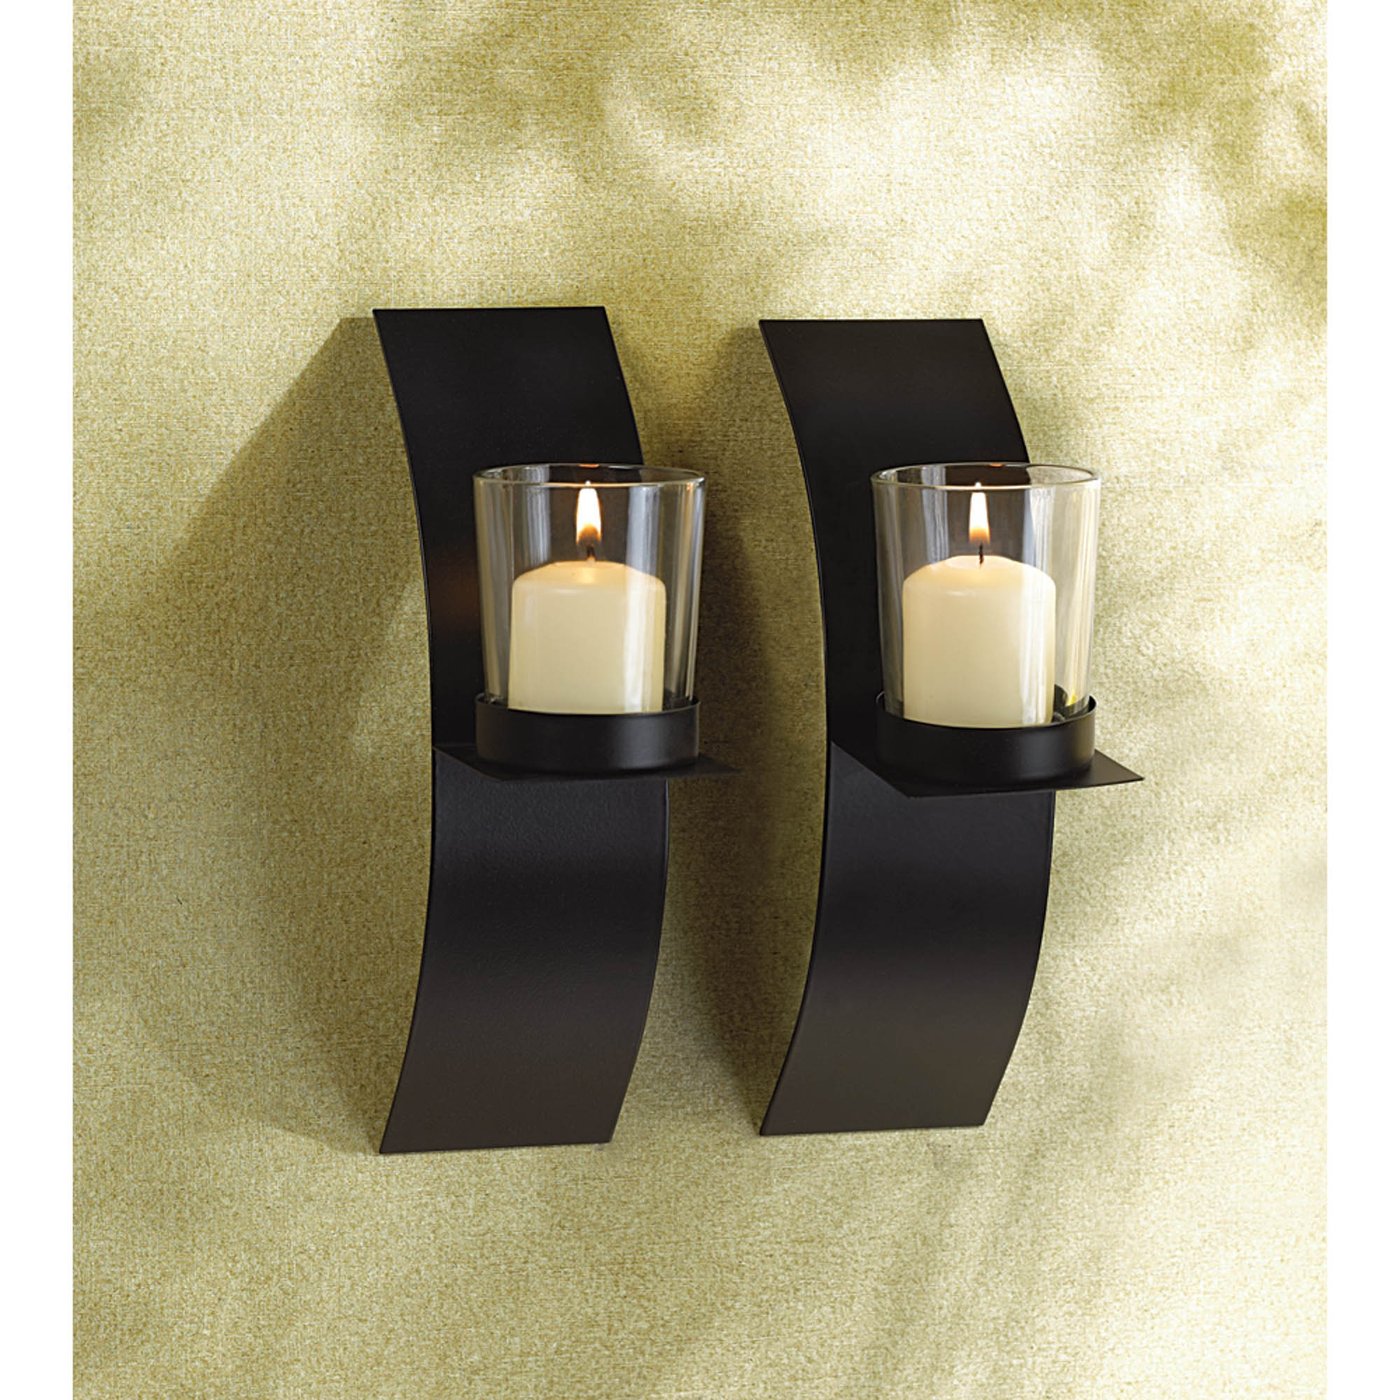 Modern Art Metal Glass Candle Sconce Duo Home Decor